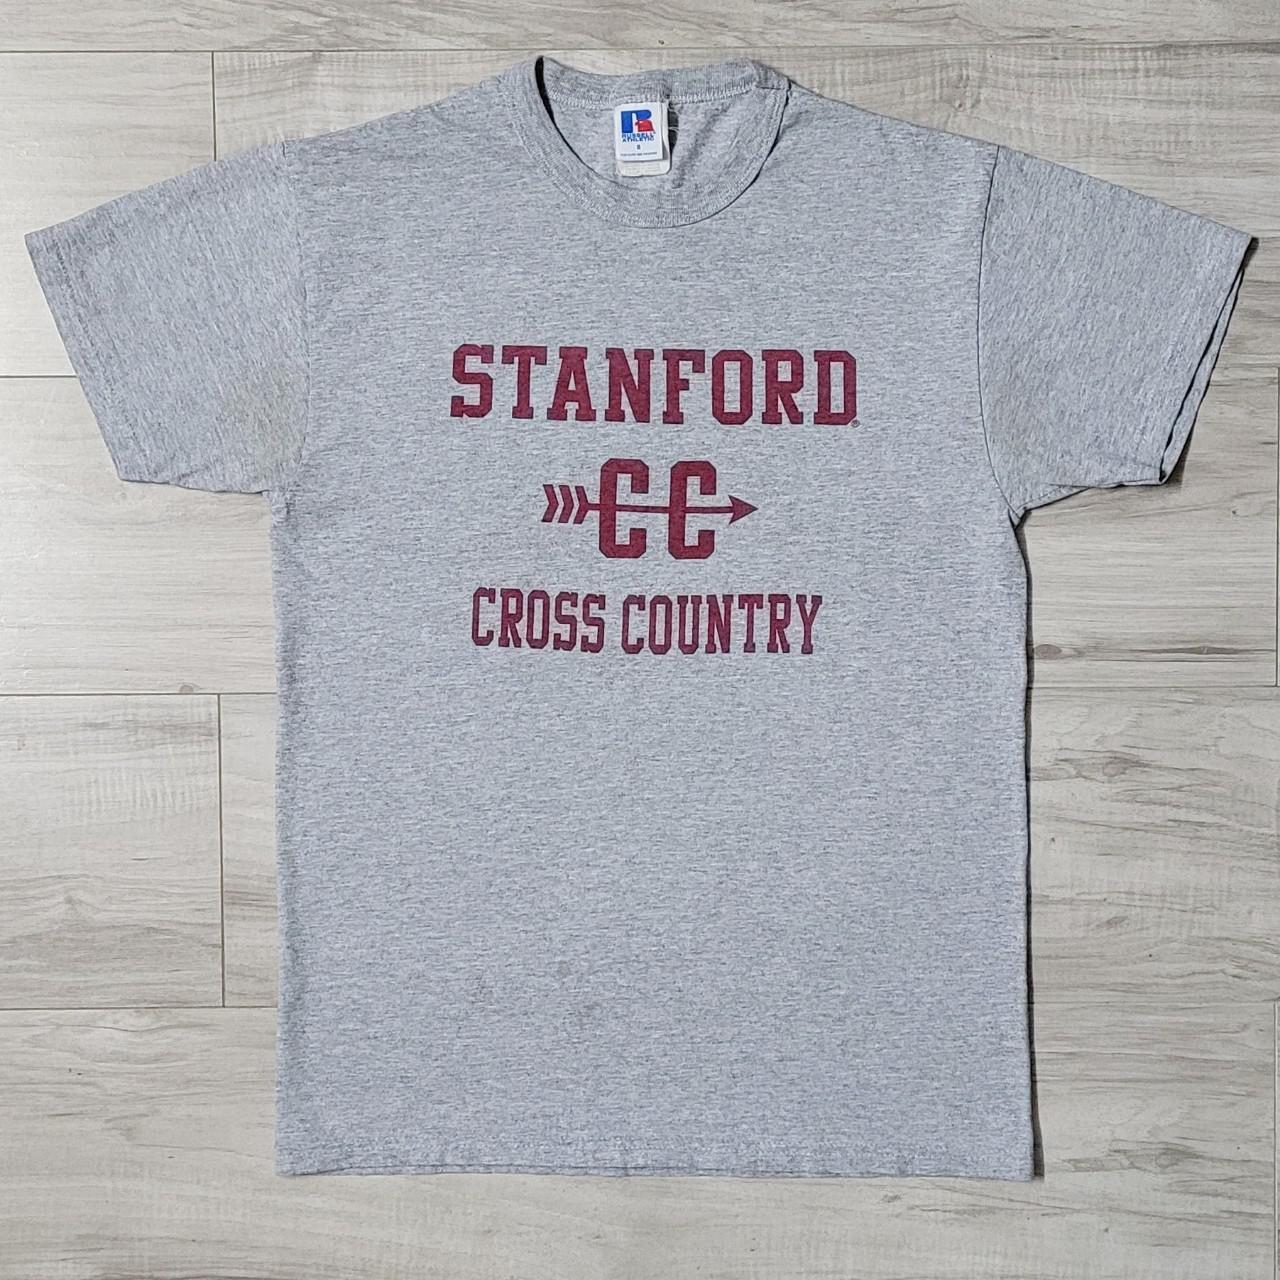 Product Image 1 - Stanford cross country collegiate t-shirt.